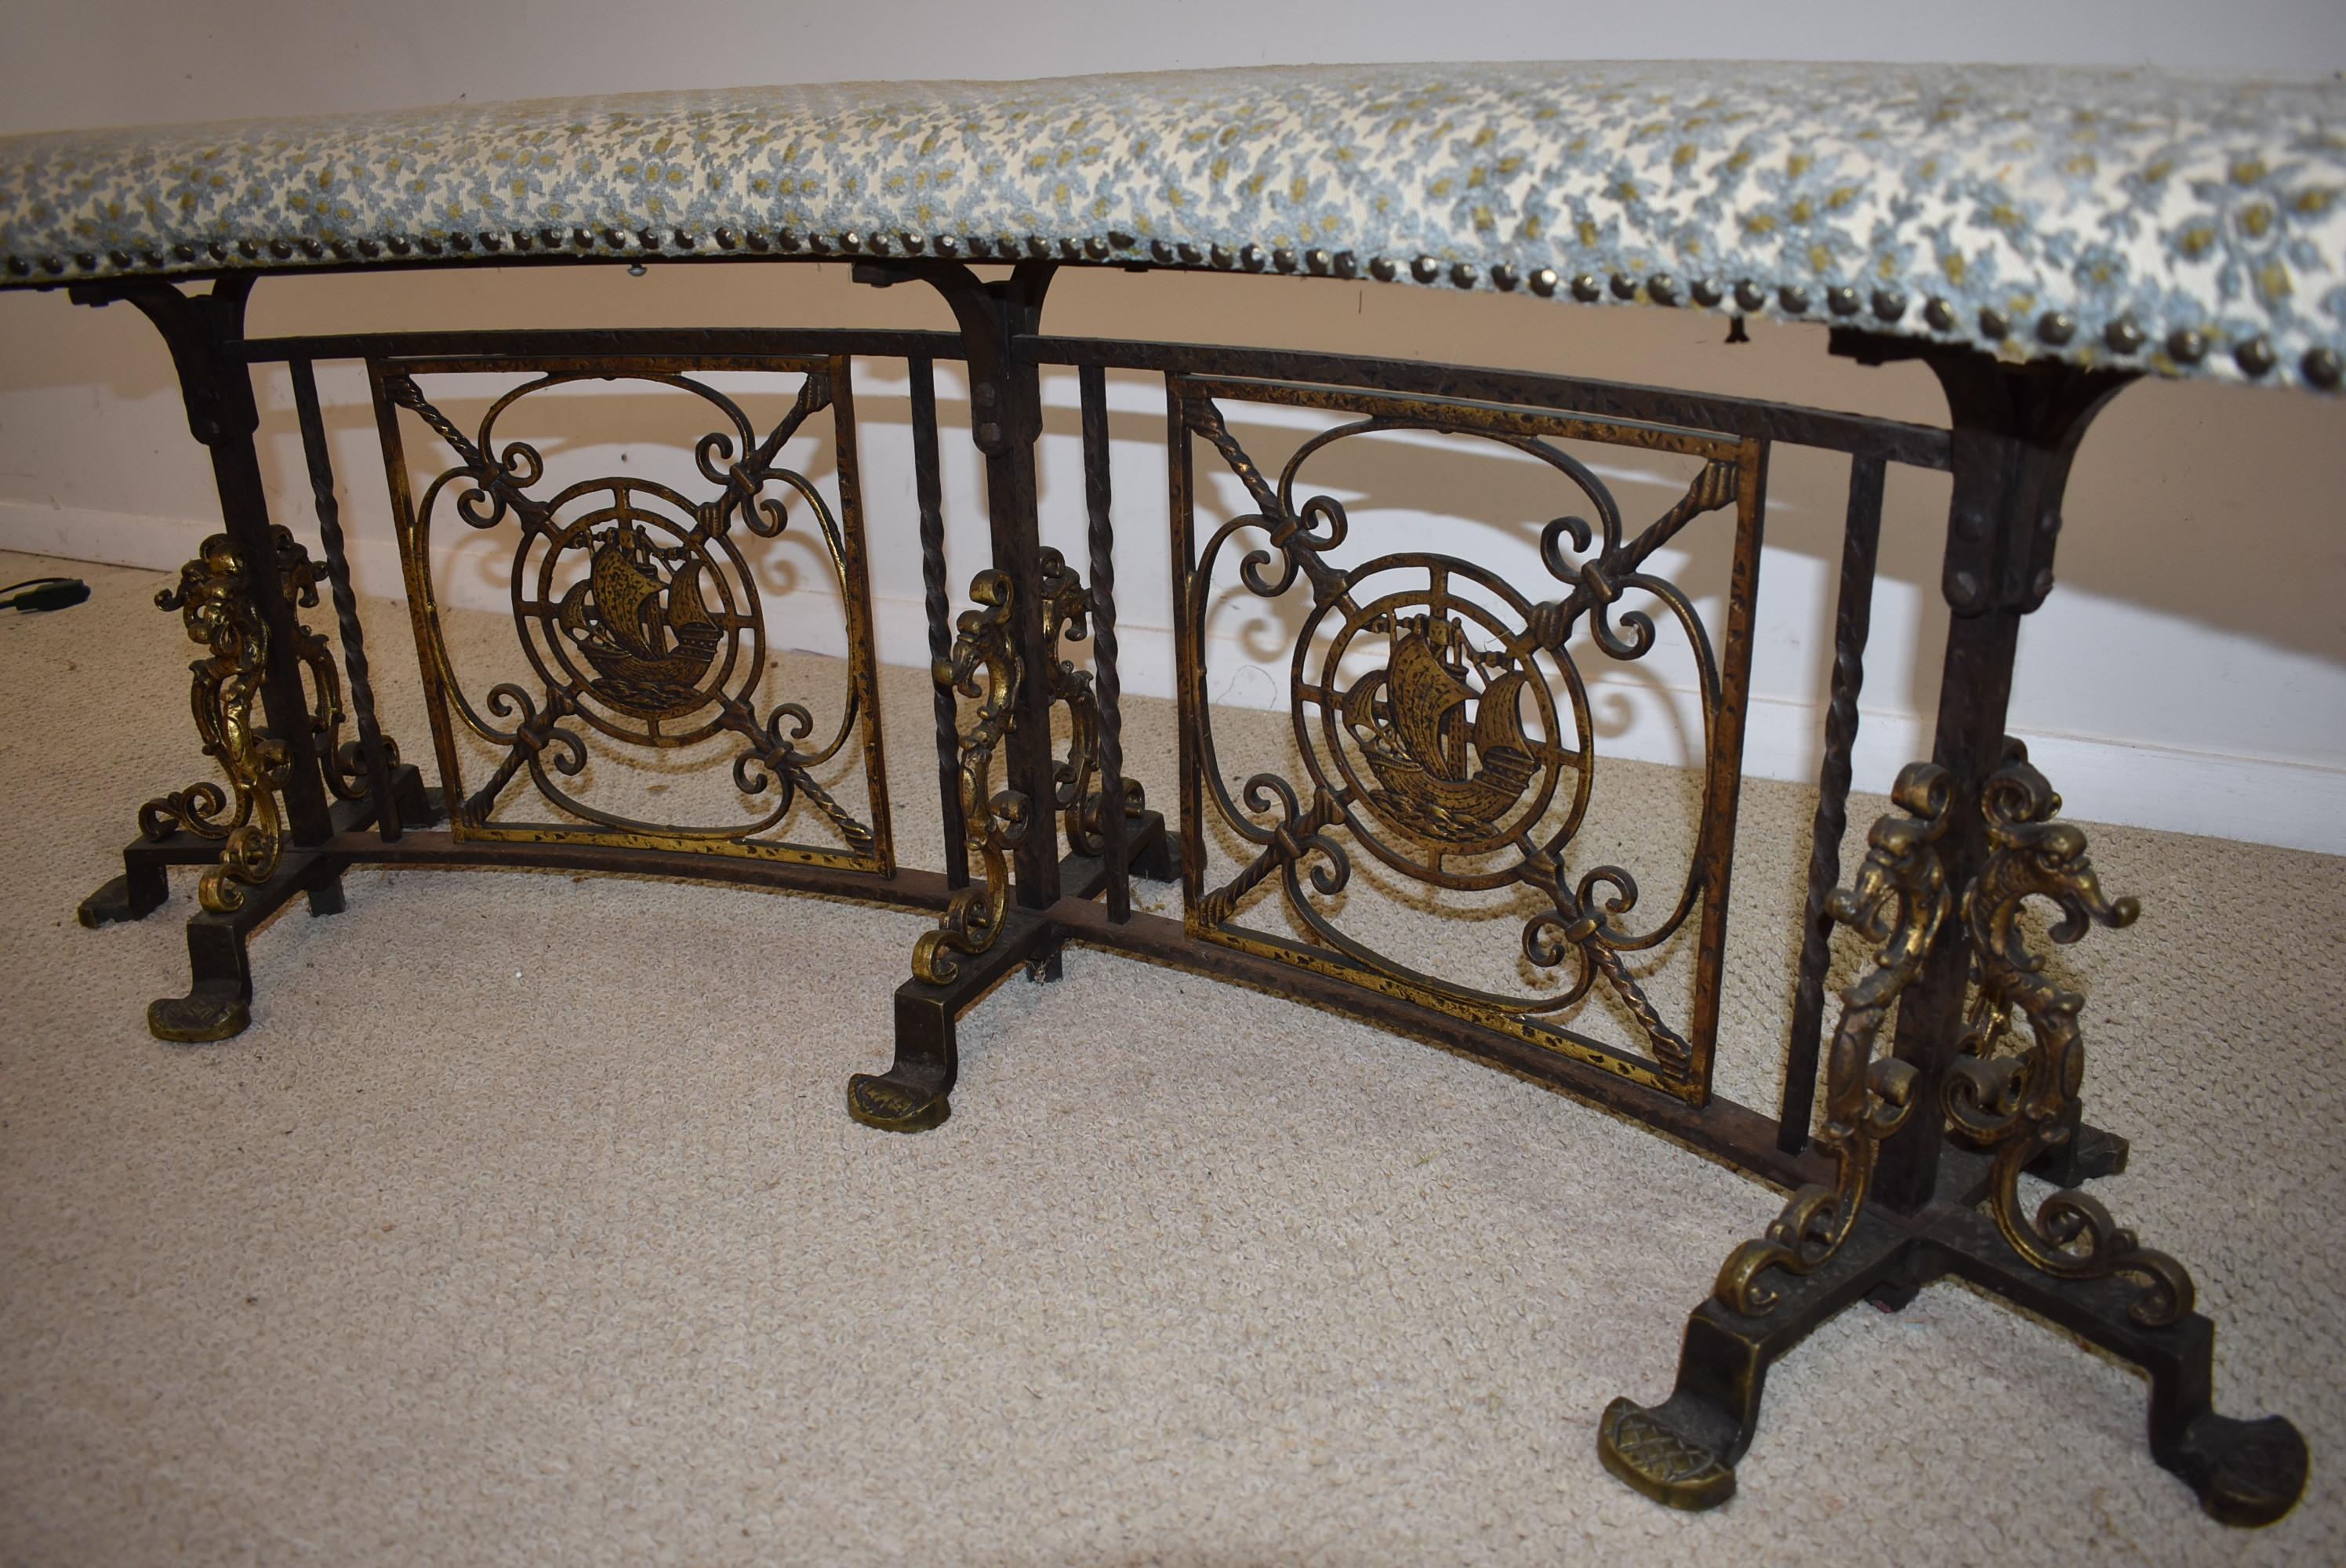 Baroque Curved Iron Upholstered Bench Attributed to Oscar Bach Ship & Seahorse Details